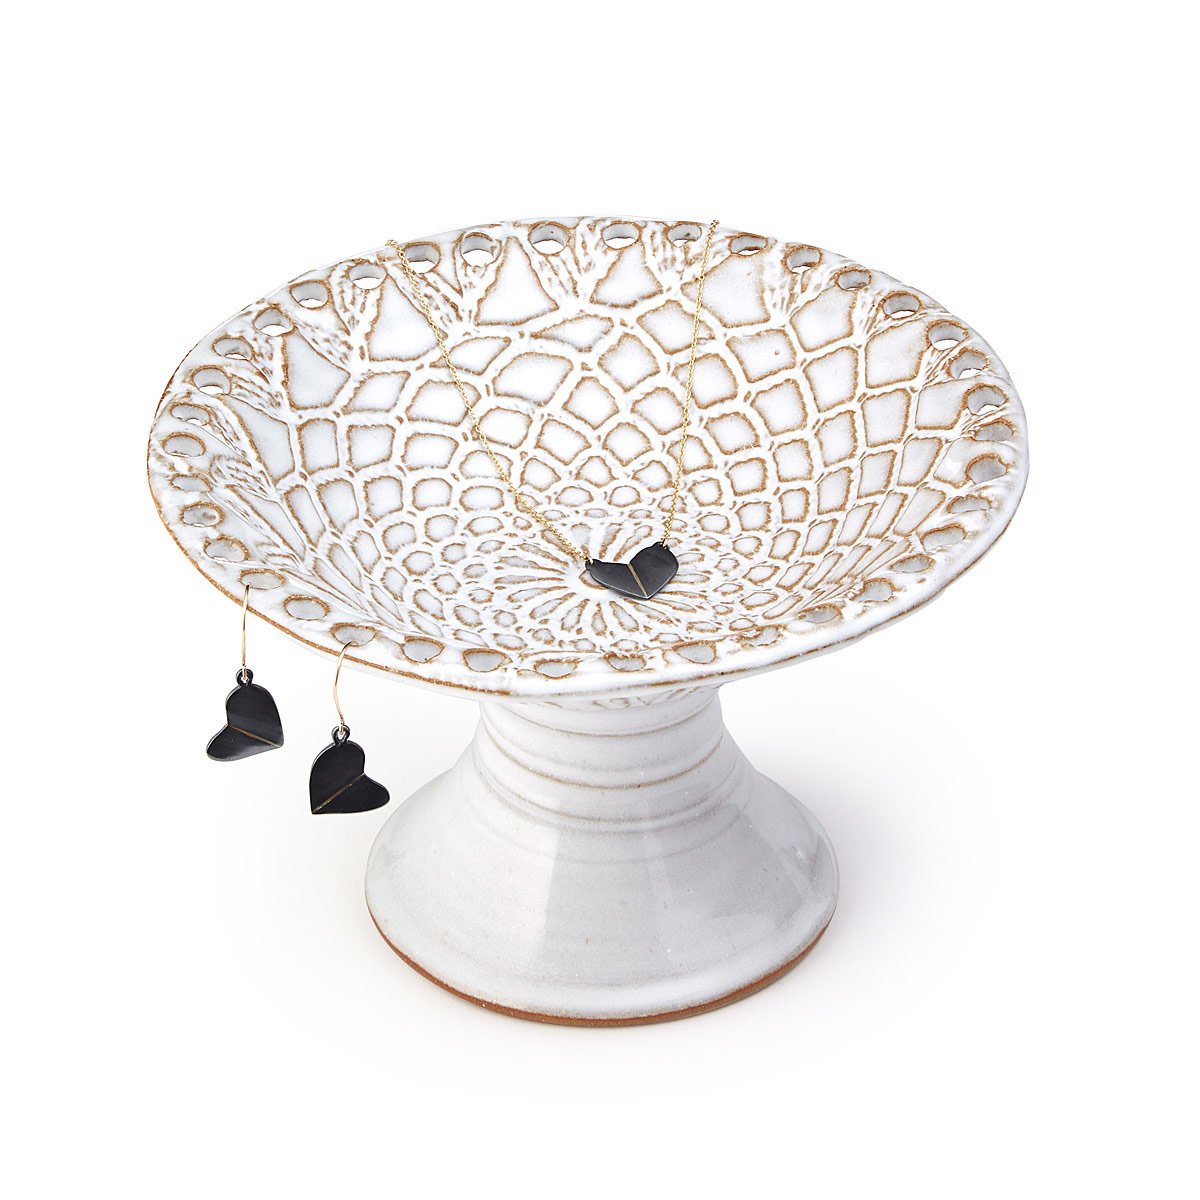 Lace Pedestal Jewelry Holder | UncommonGoods